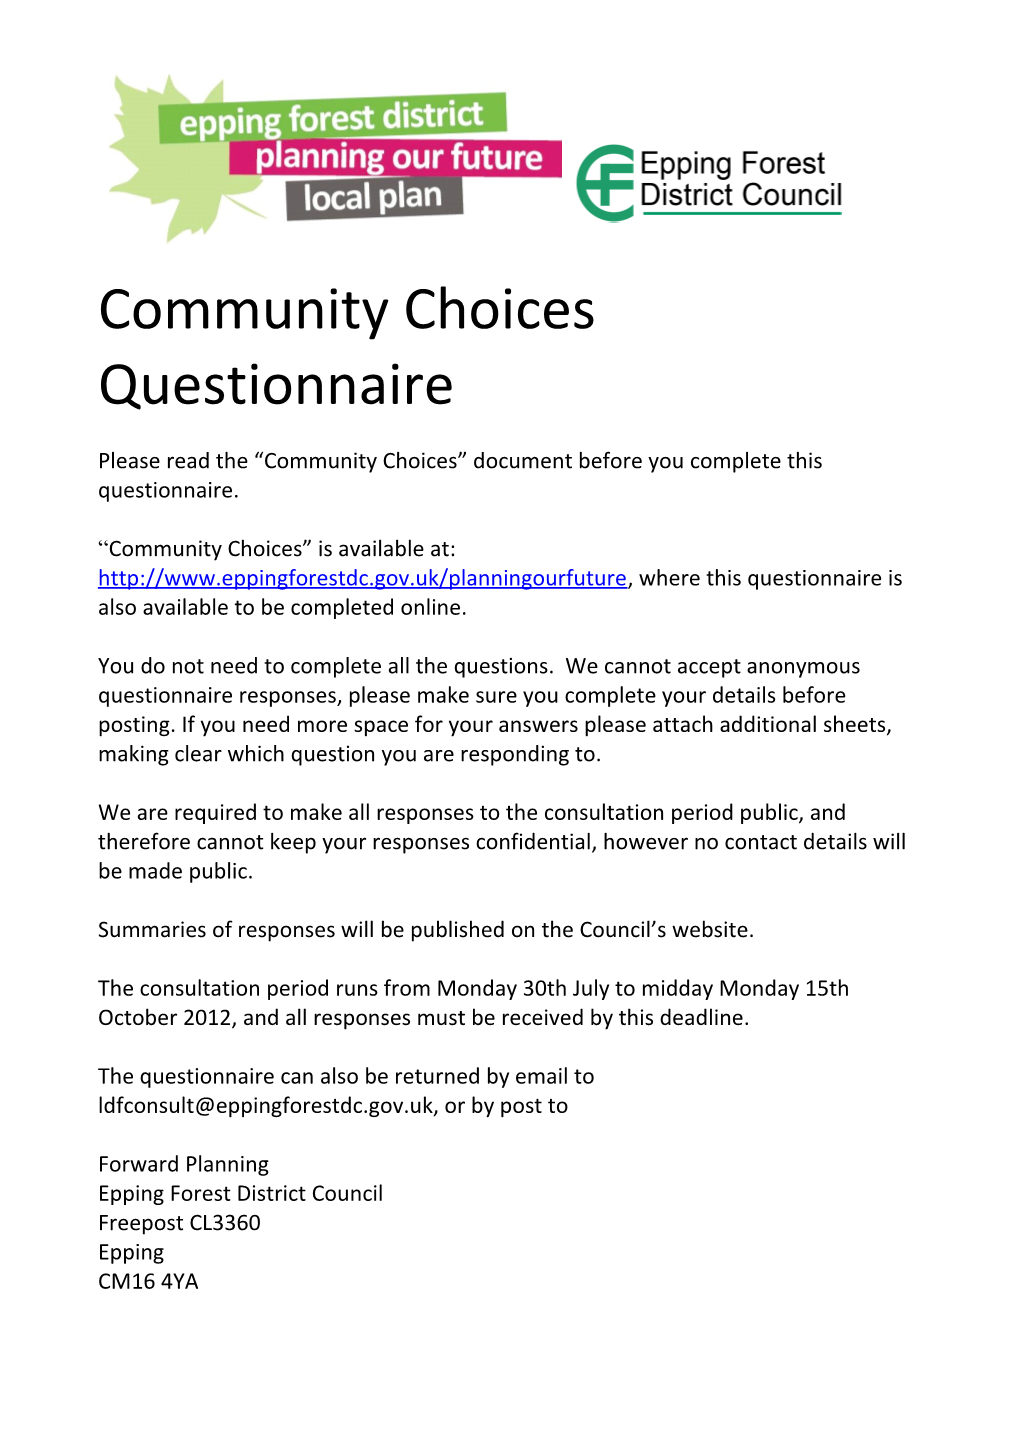 Please Read the Community Choices Document Before You Complete This Questionnaire